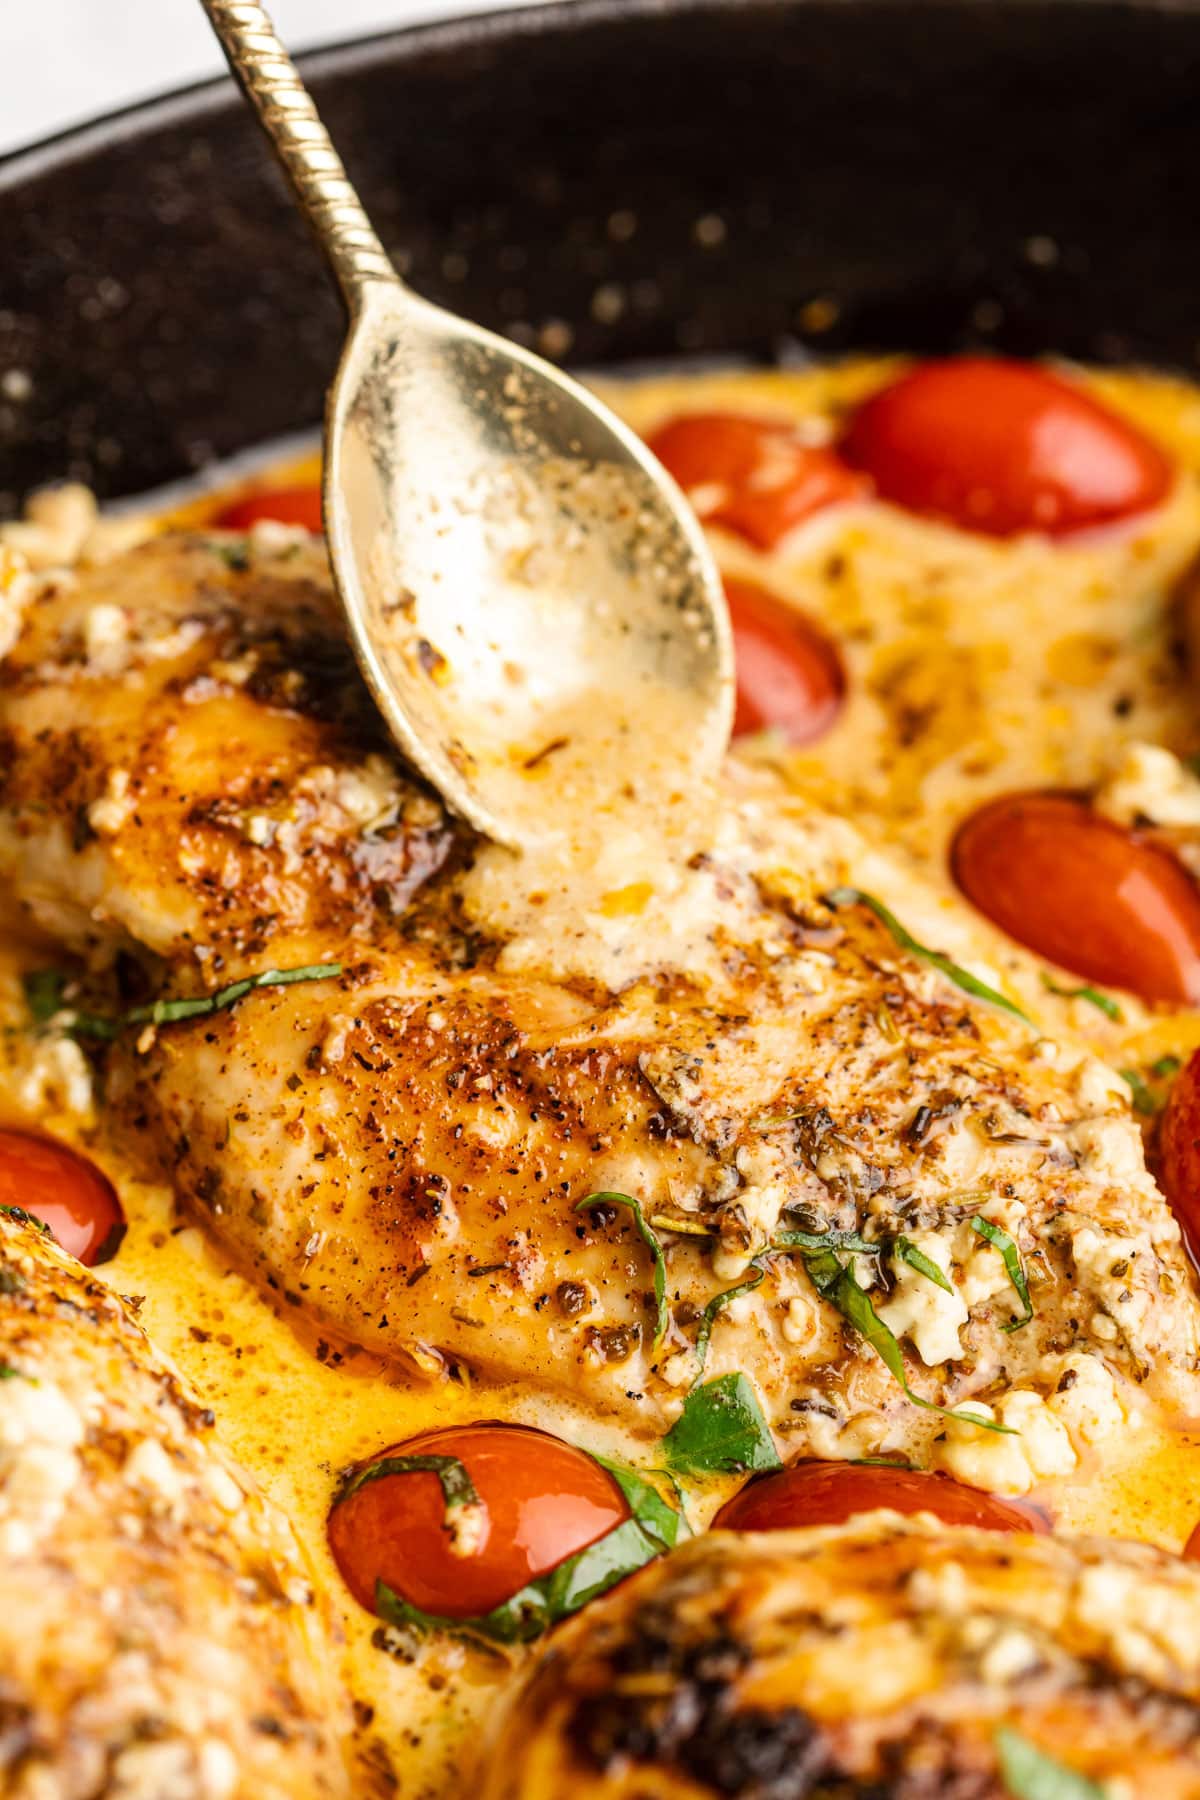 Baked Feta Chicken - The Whole Cook